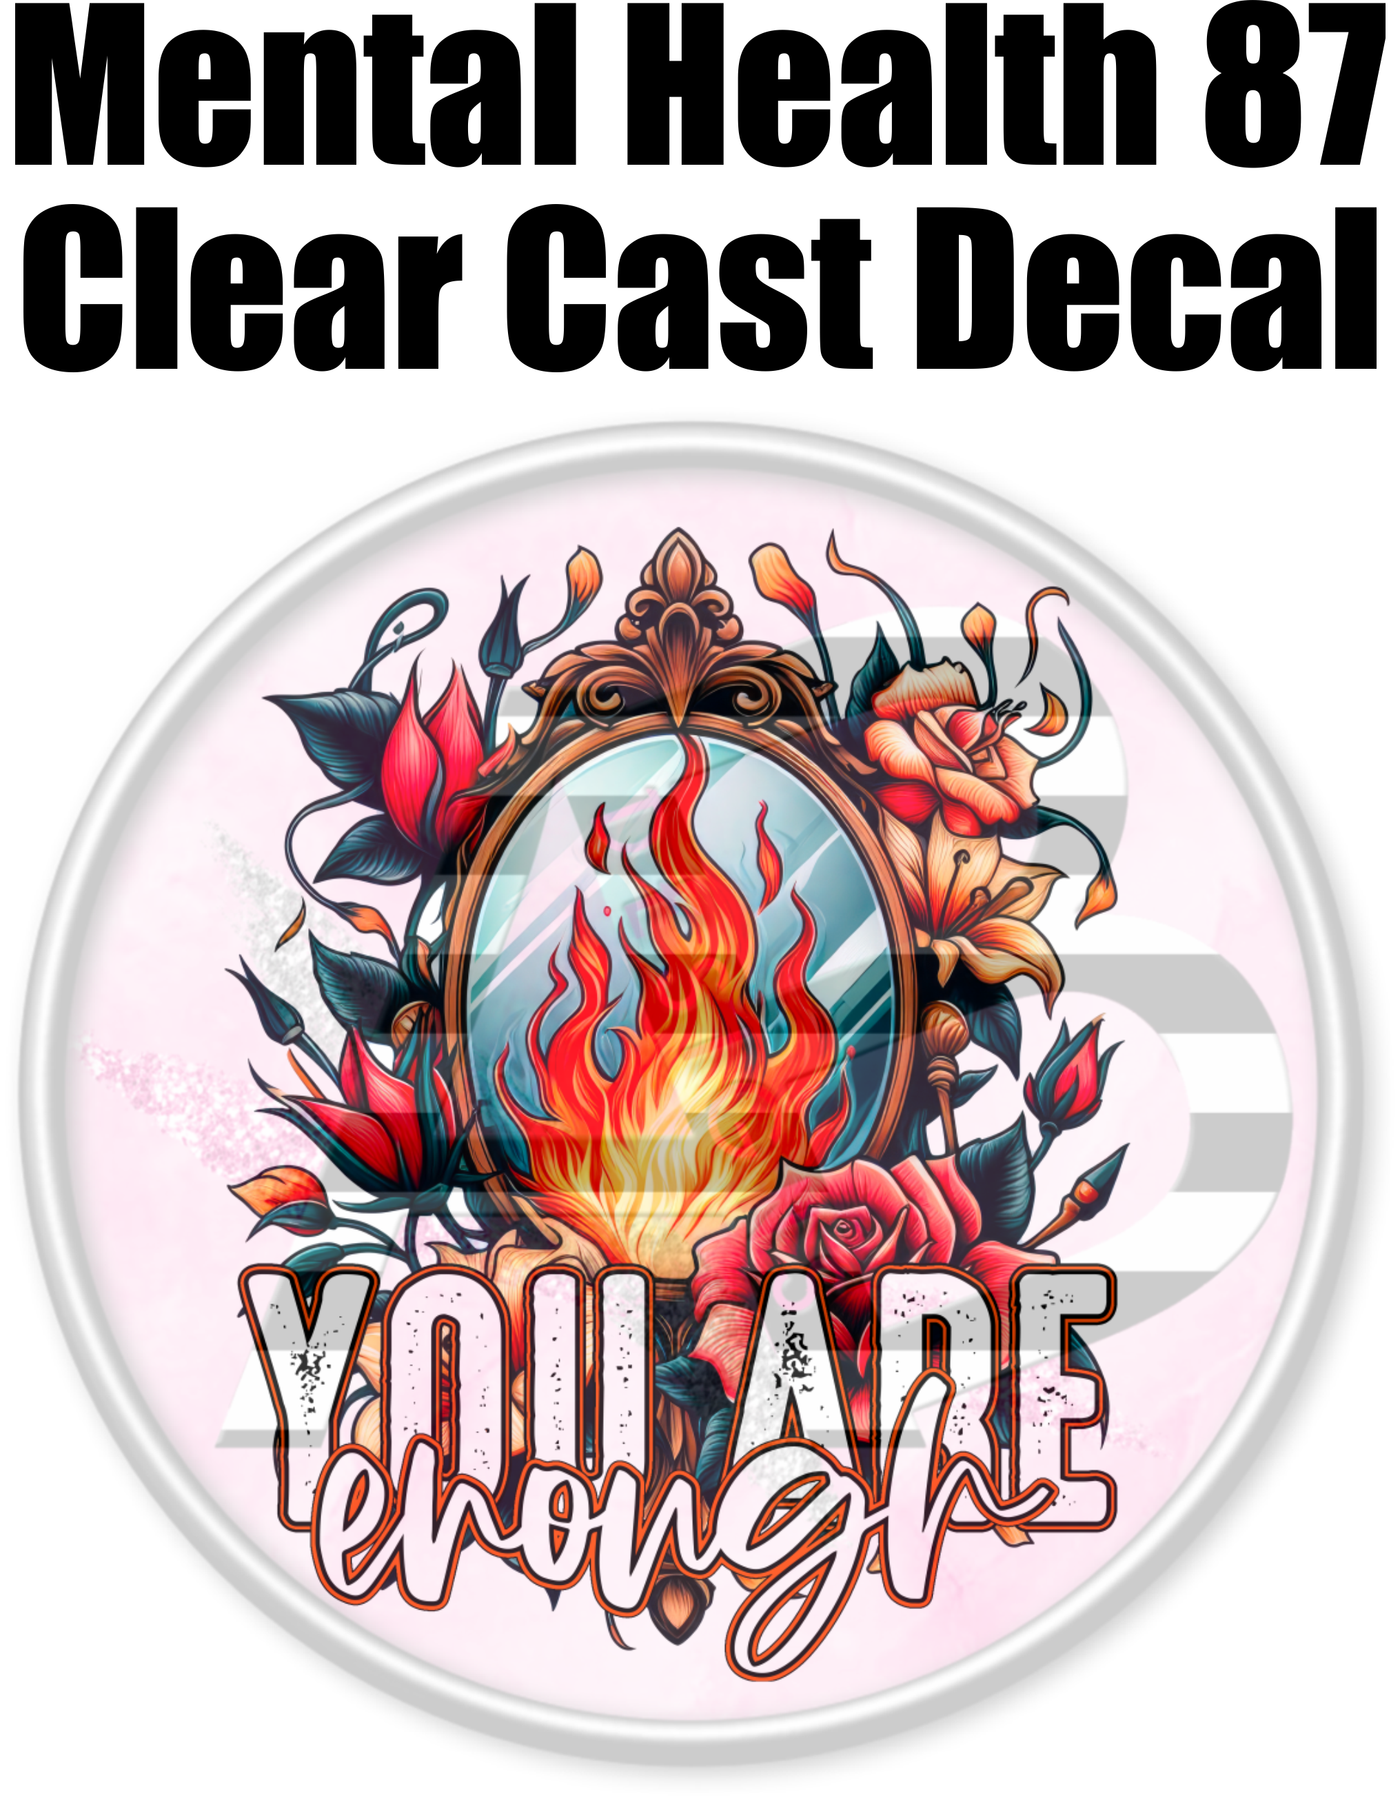 Mental Health 87 - Clear Cast Decal-471